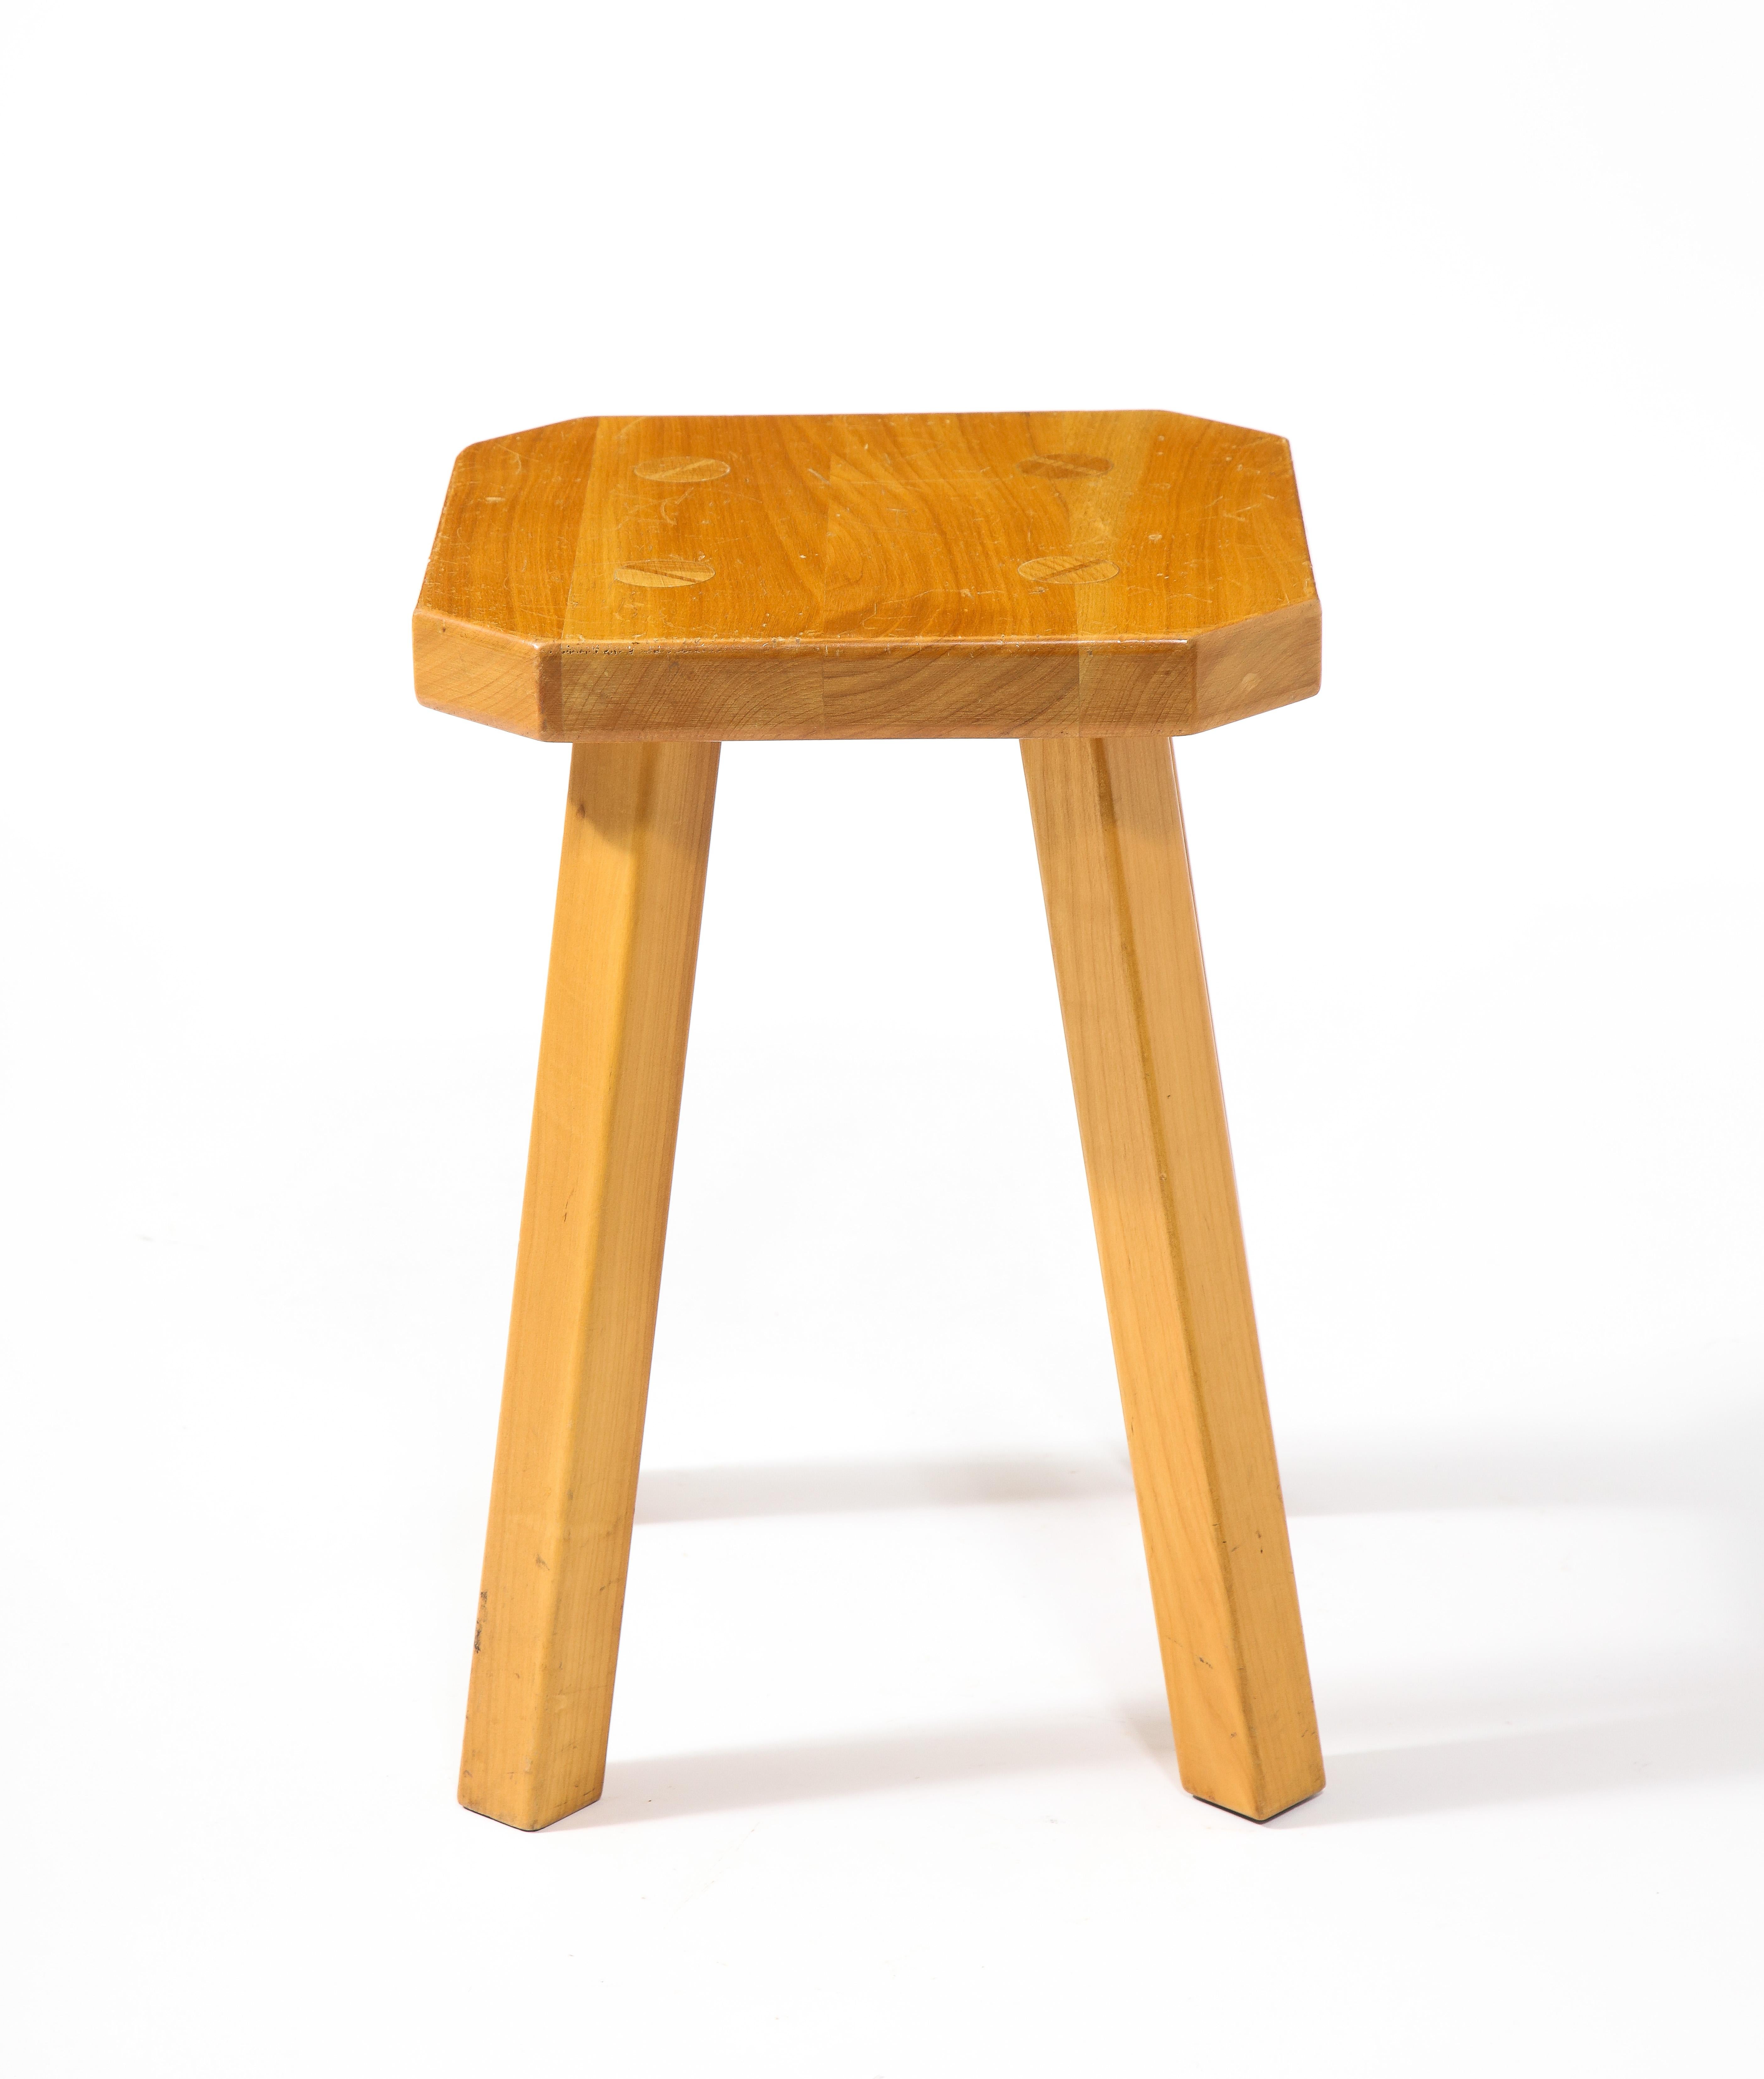 Pair of Solid Elm Stools Square with Chamfers and Through Tenons, France 1960's For Sale 5